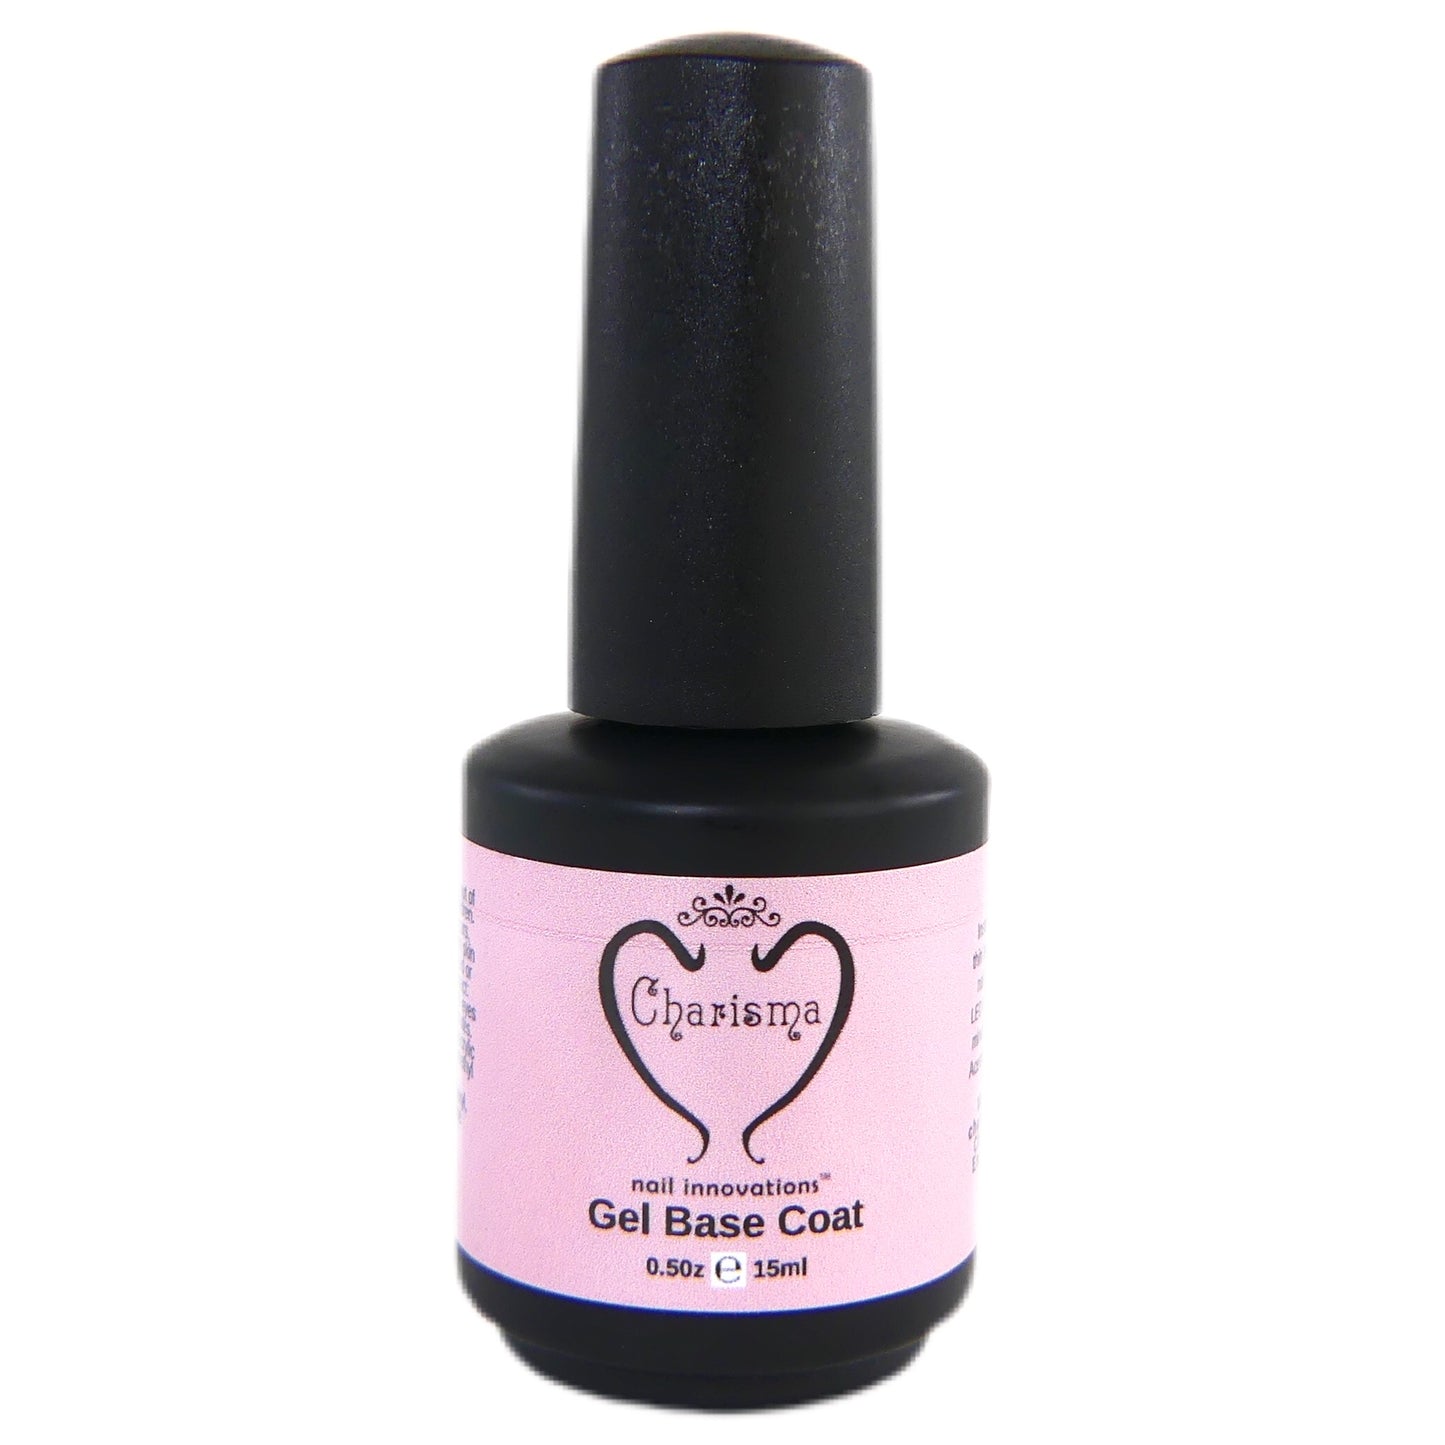 Load image into Gallery viewer, Gel Base Charisma Nail Innovations - My Little Nail Art Shop
